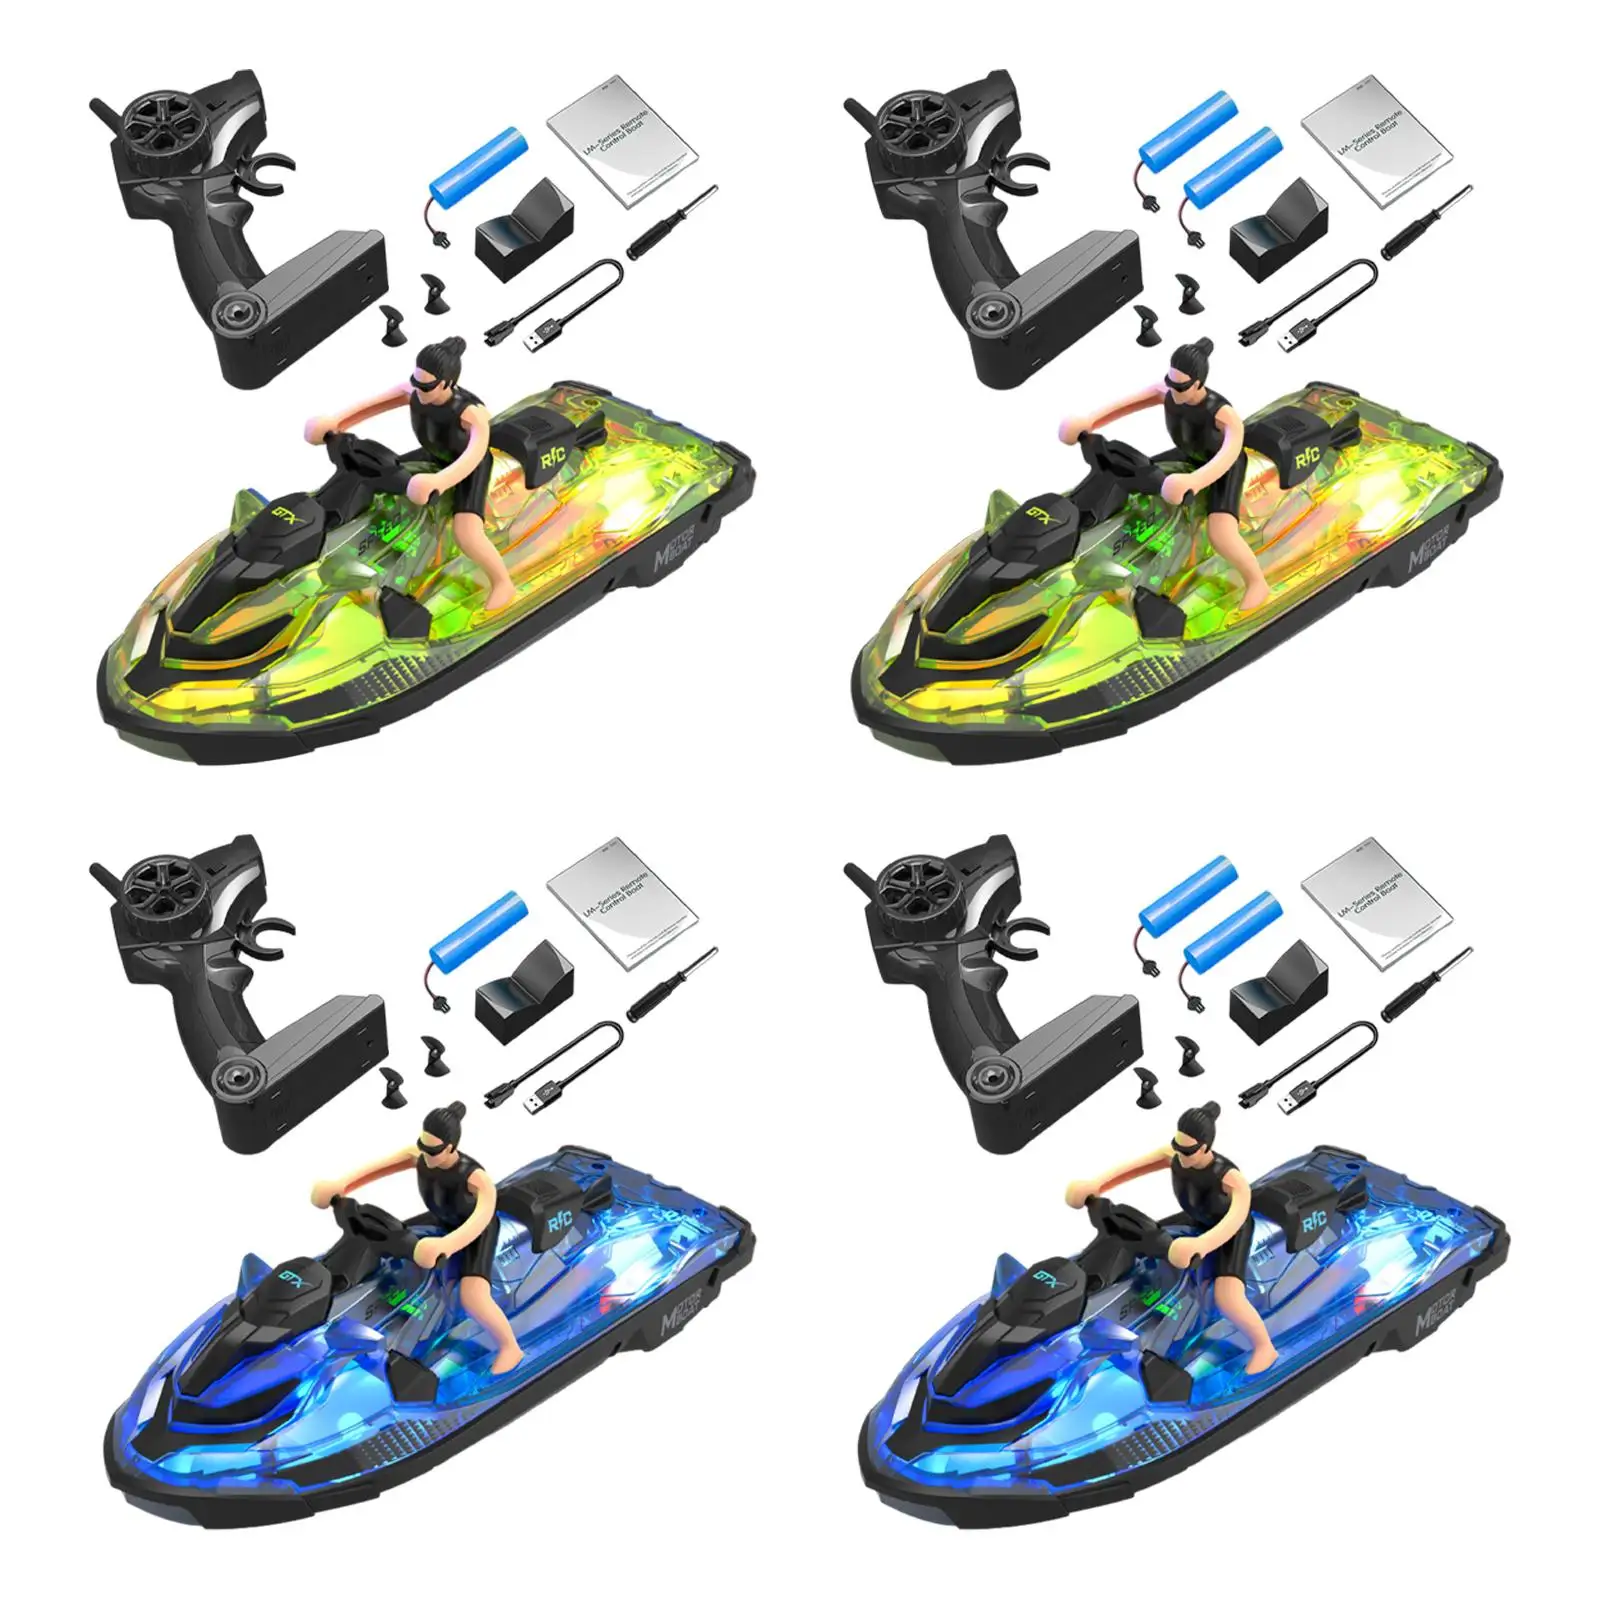 RC Speed Boat High Sensitivity High Speed RC Boat for Adults Boys Kids